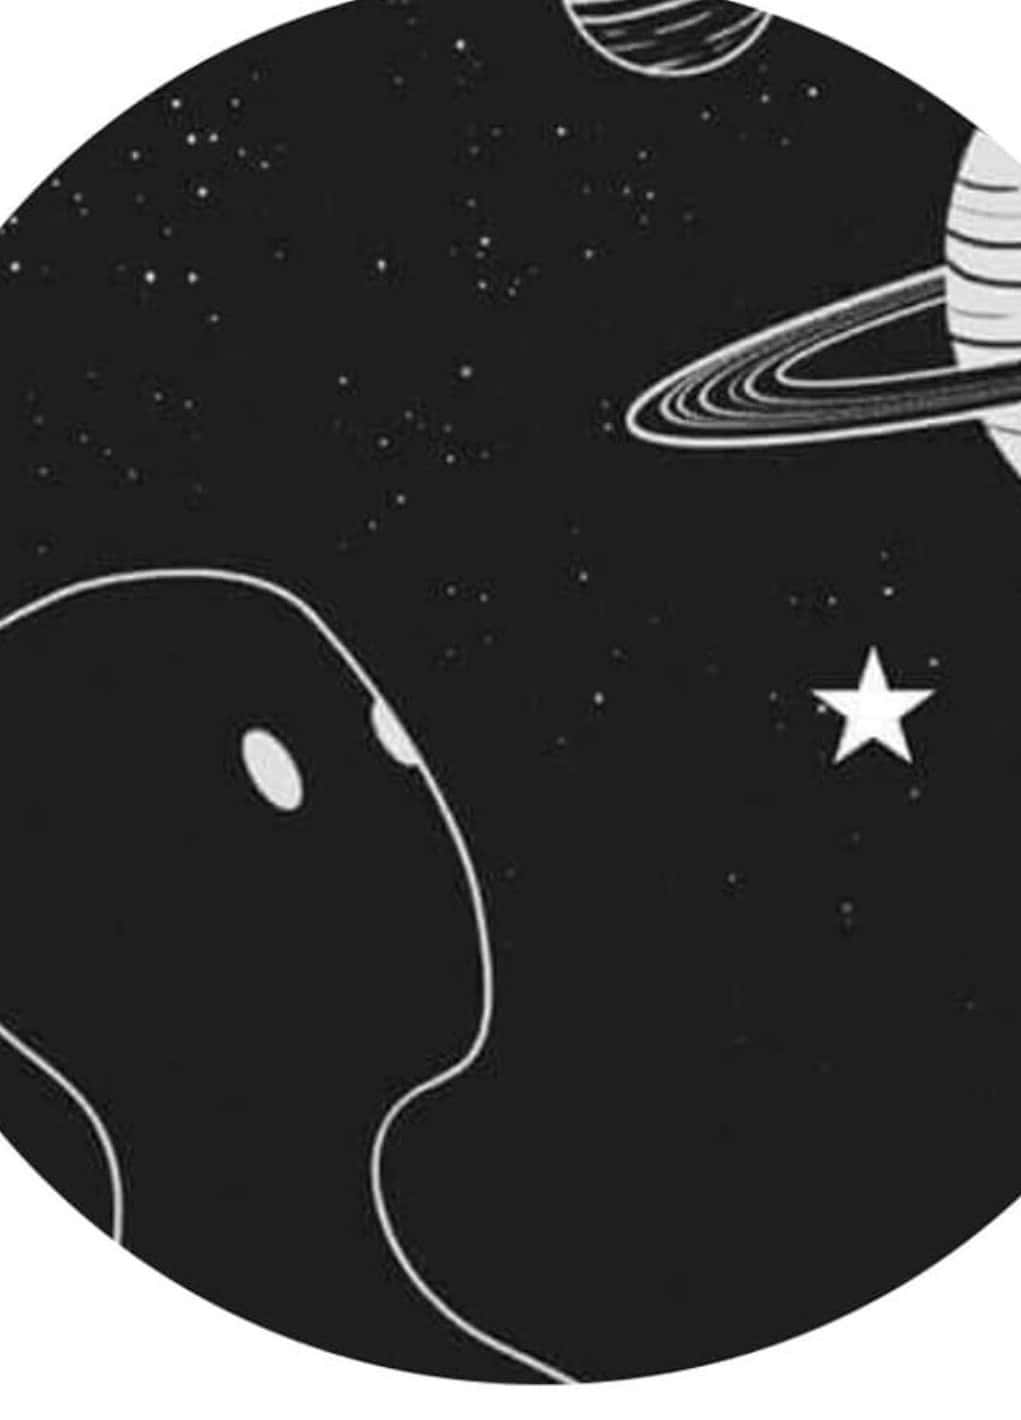 A Black And White Drawing Of A Spaceship And Planets